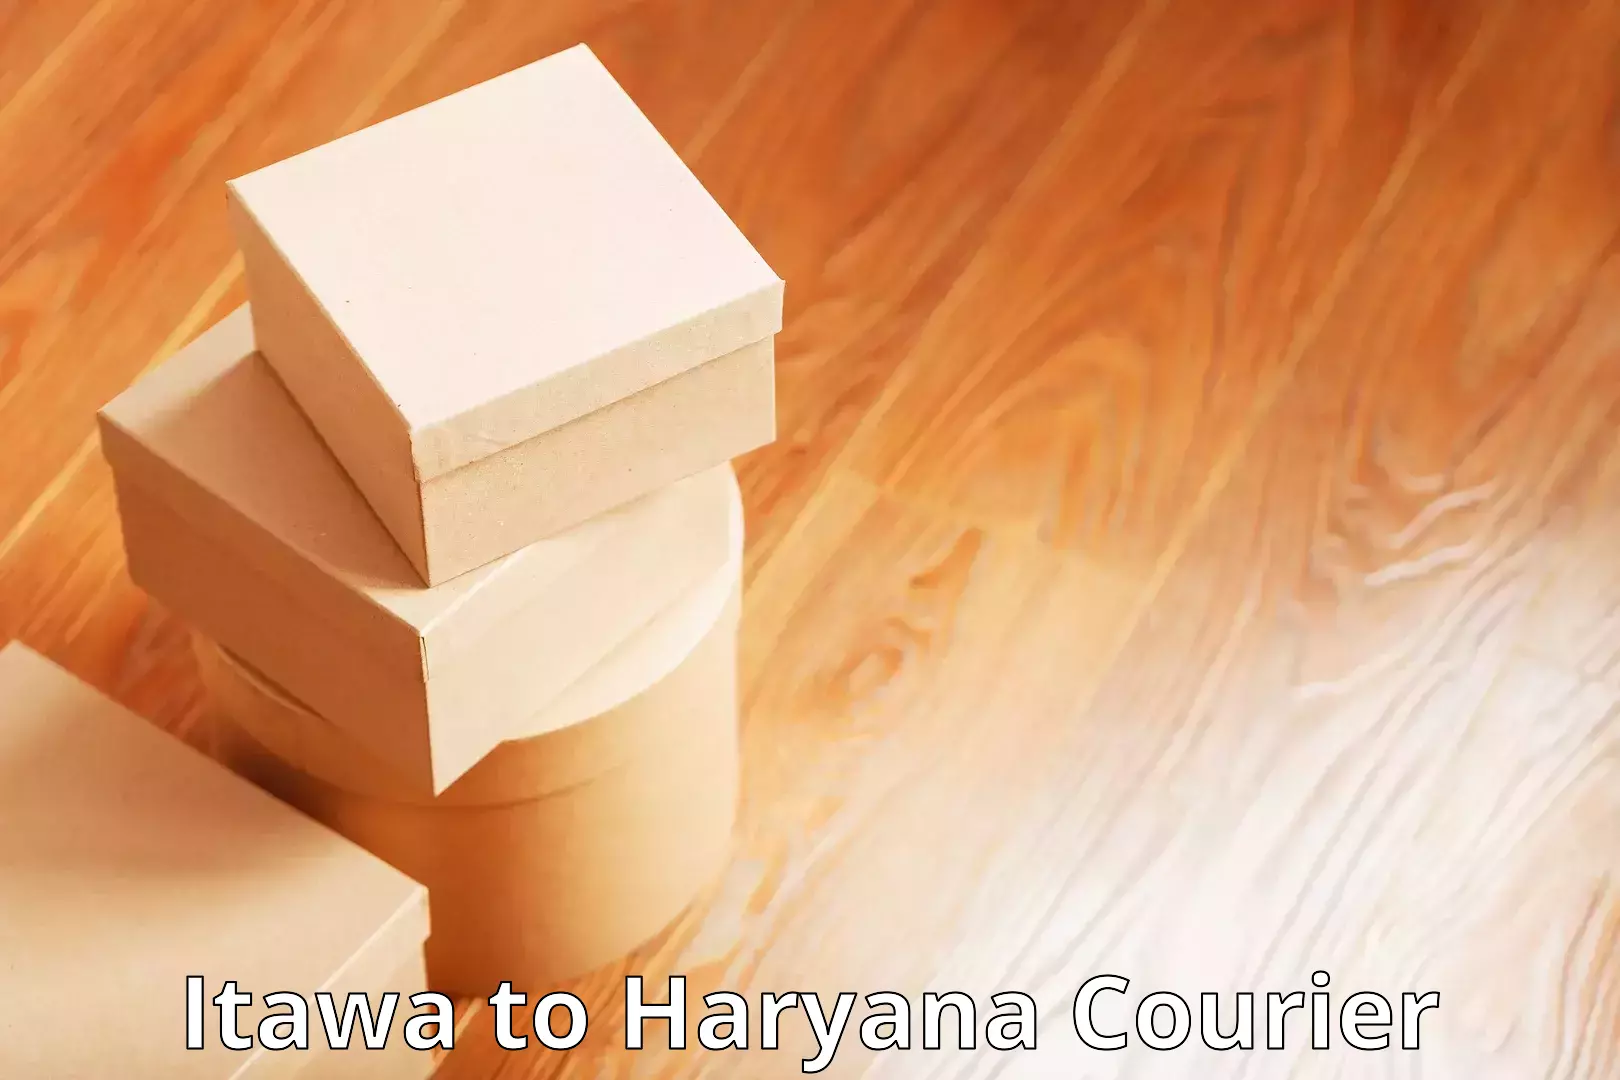 Overnight delivery services Itawa to Haryana